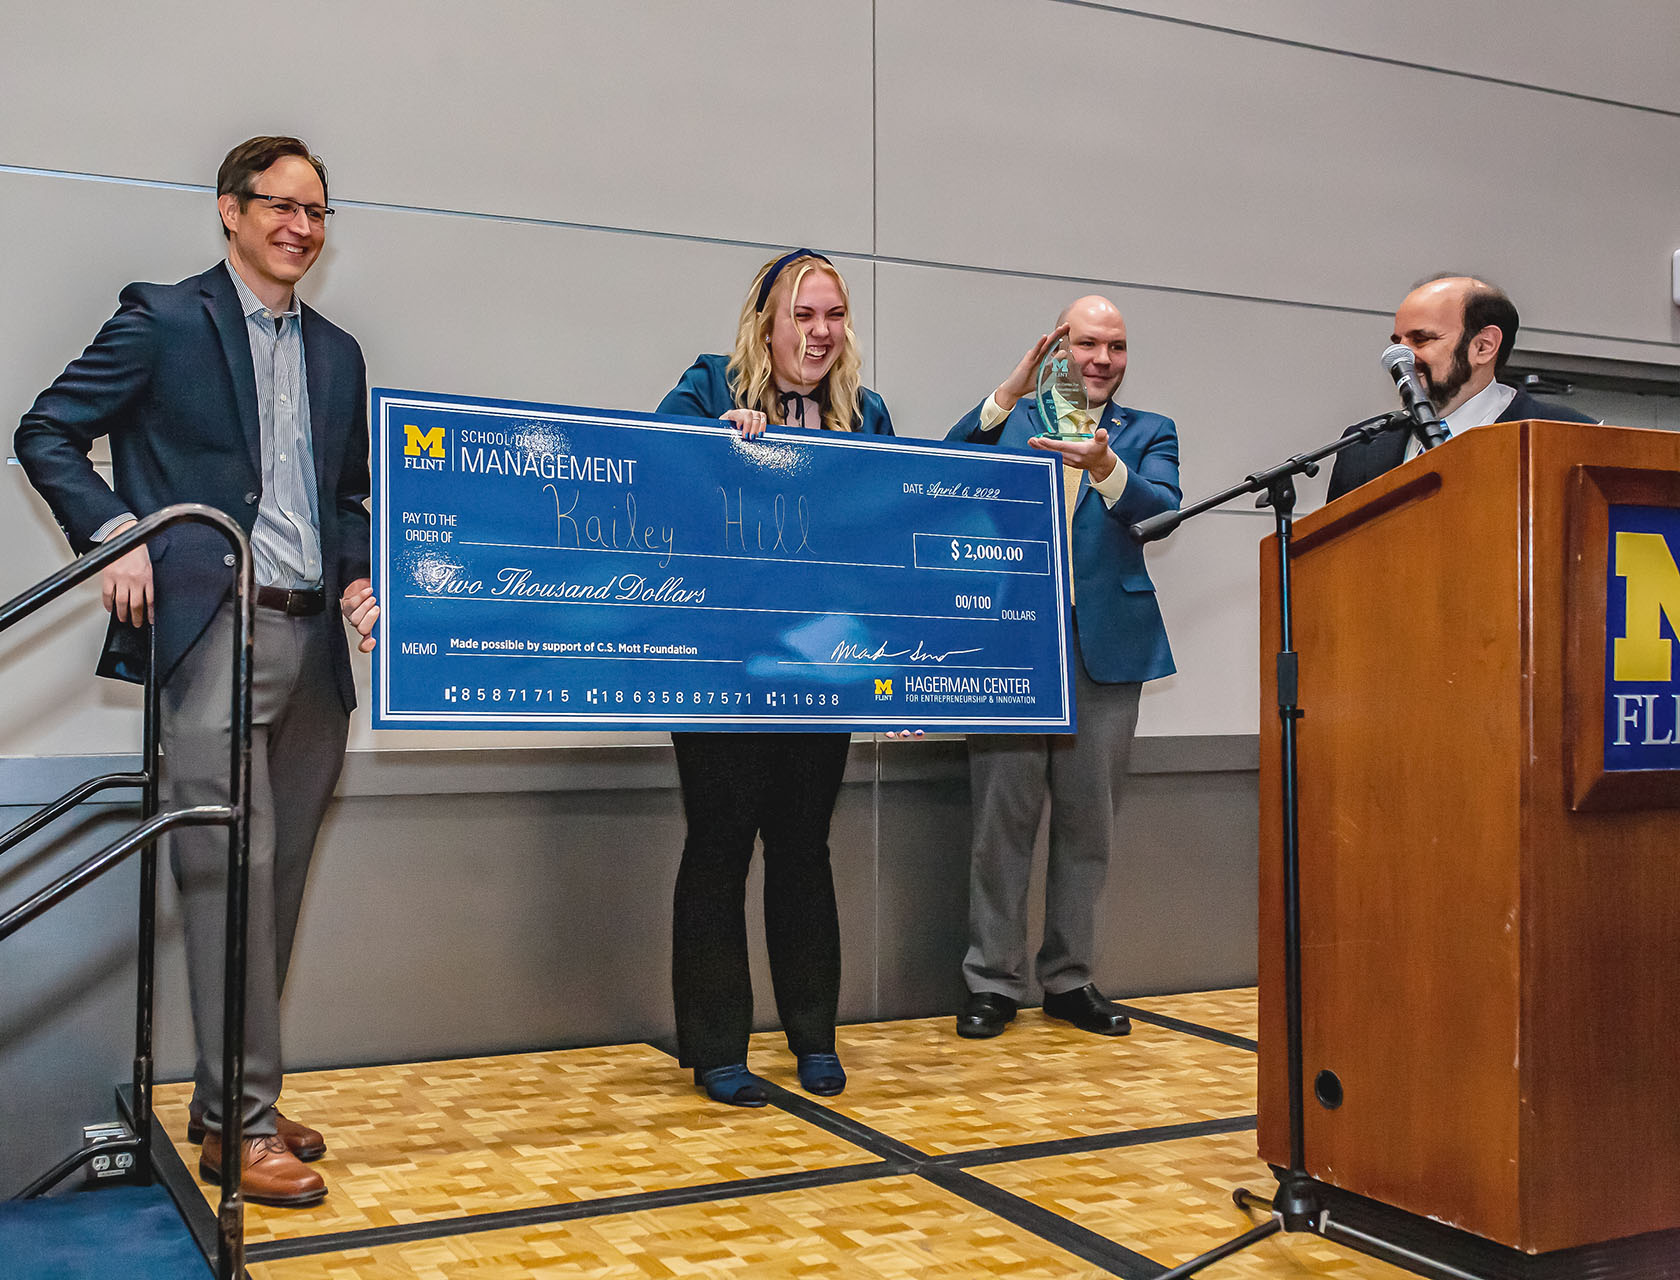 A high school student, Kailey Hill, stands on a raised stage holding after having been handed by officials from University of Michigan-Flint’s Zillion Solutions program a large carboard check made out to her for $2000.